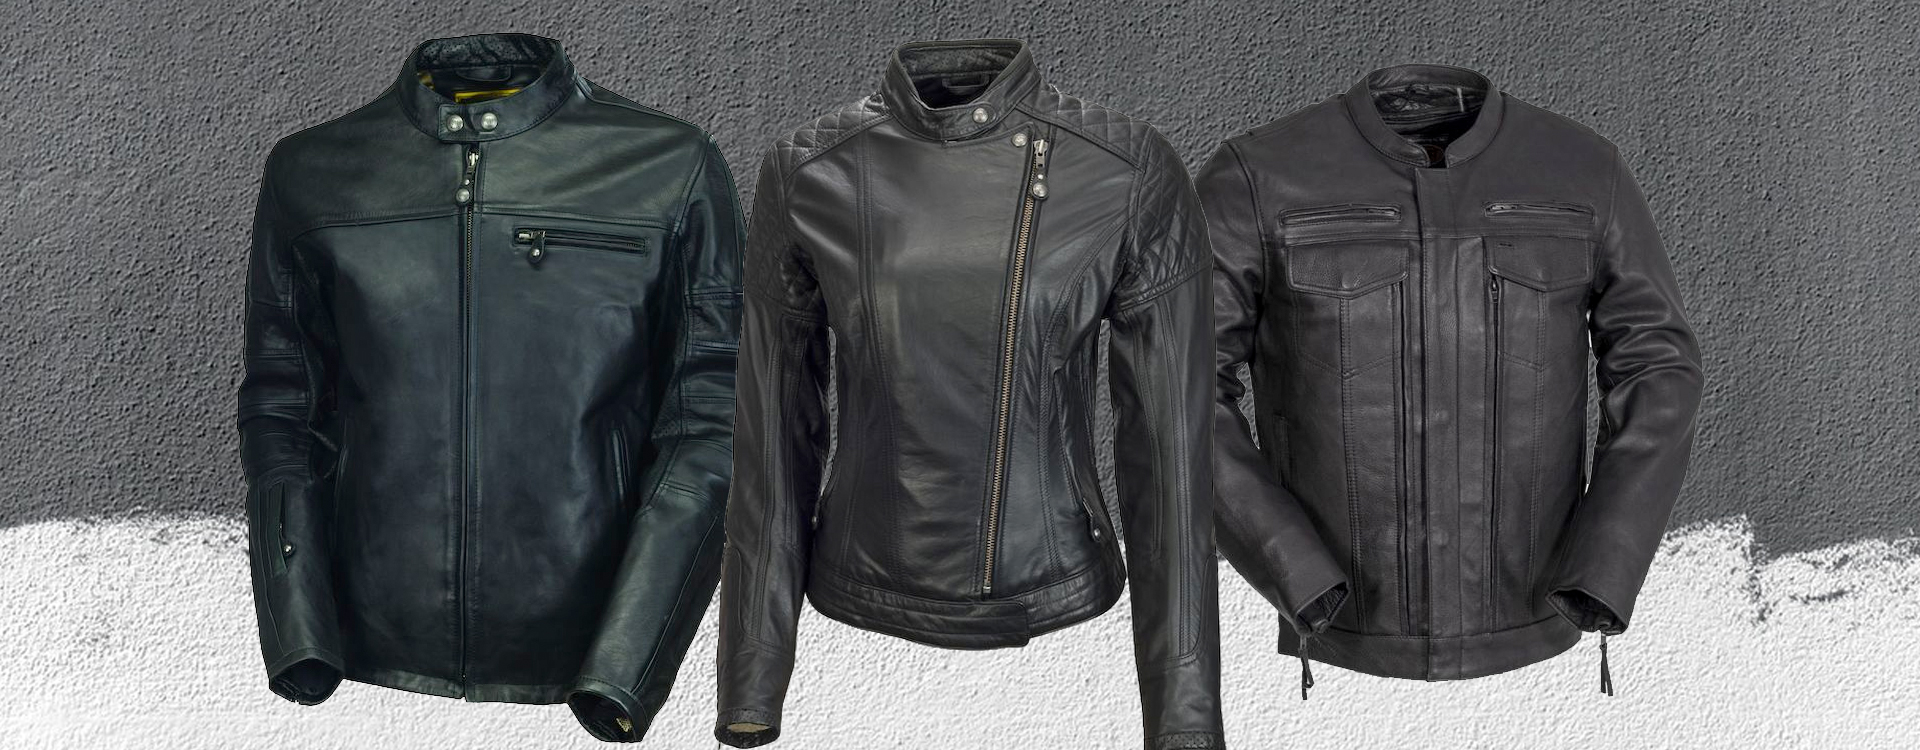 Best Leather Motorcycle Jackets 2021, Who Makes The Best Leather Motorcycle Jackets